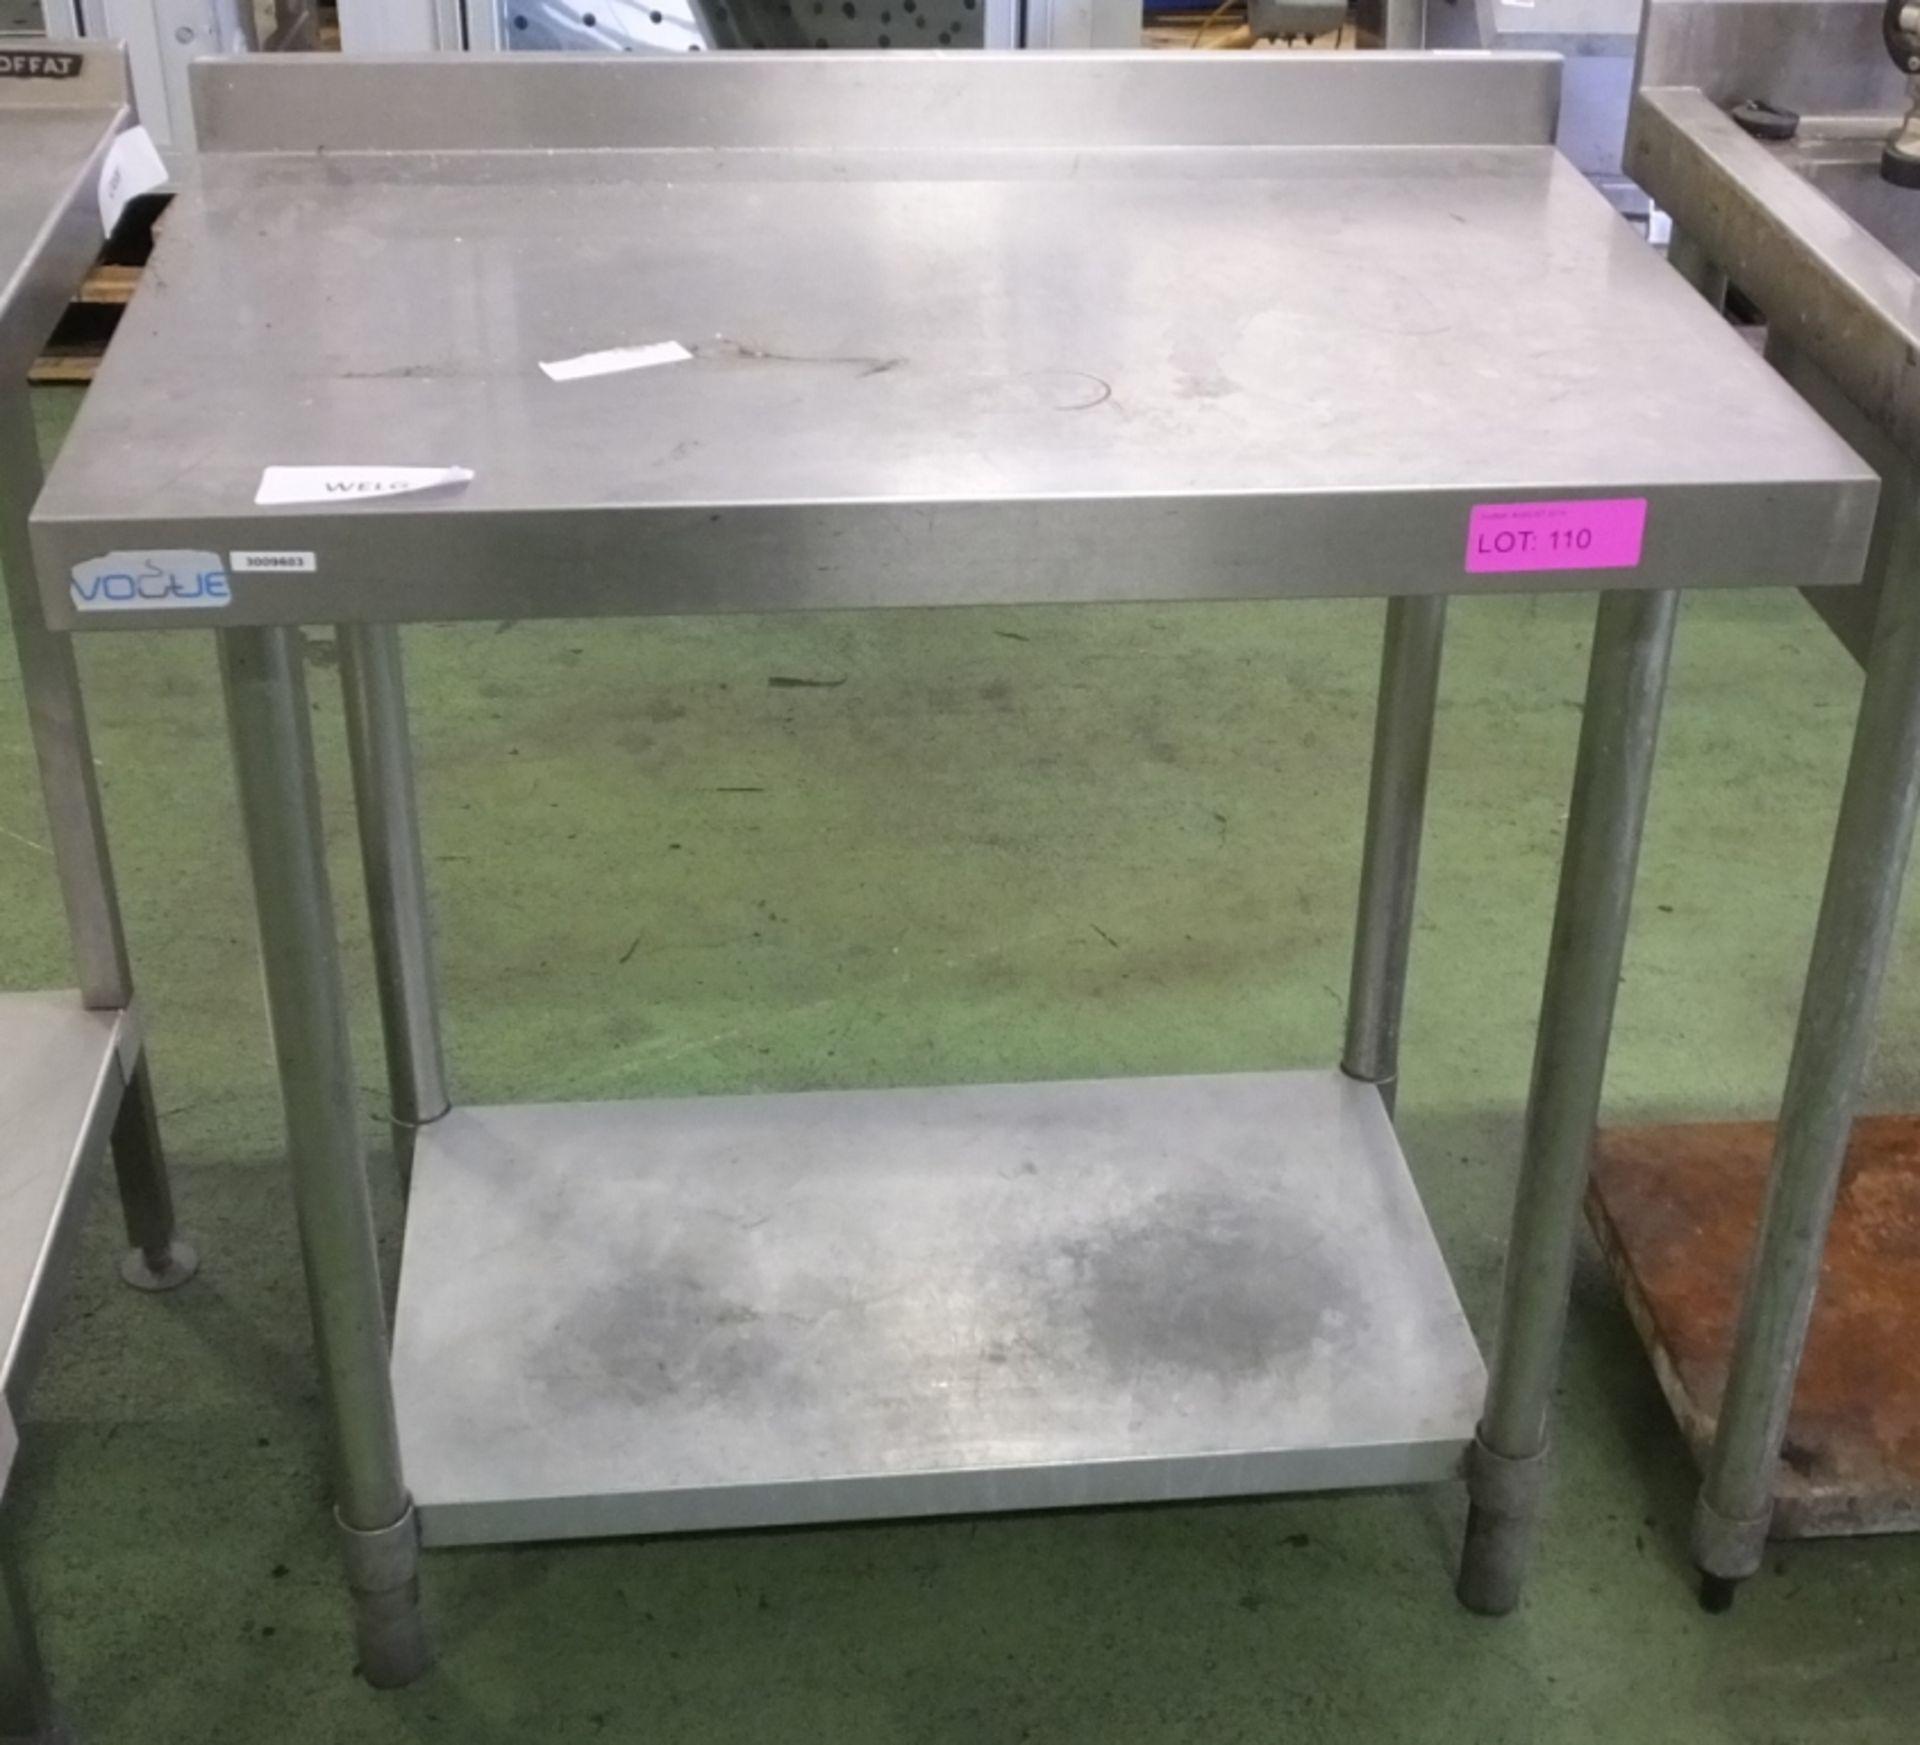 Vogue Prep-Table Stainless Steel L900 x W600 x H920mm